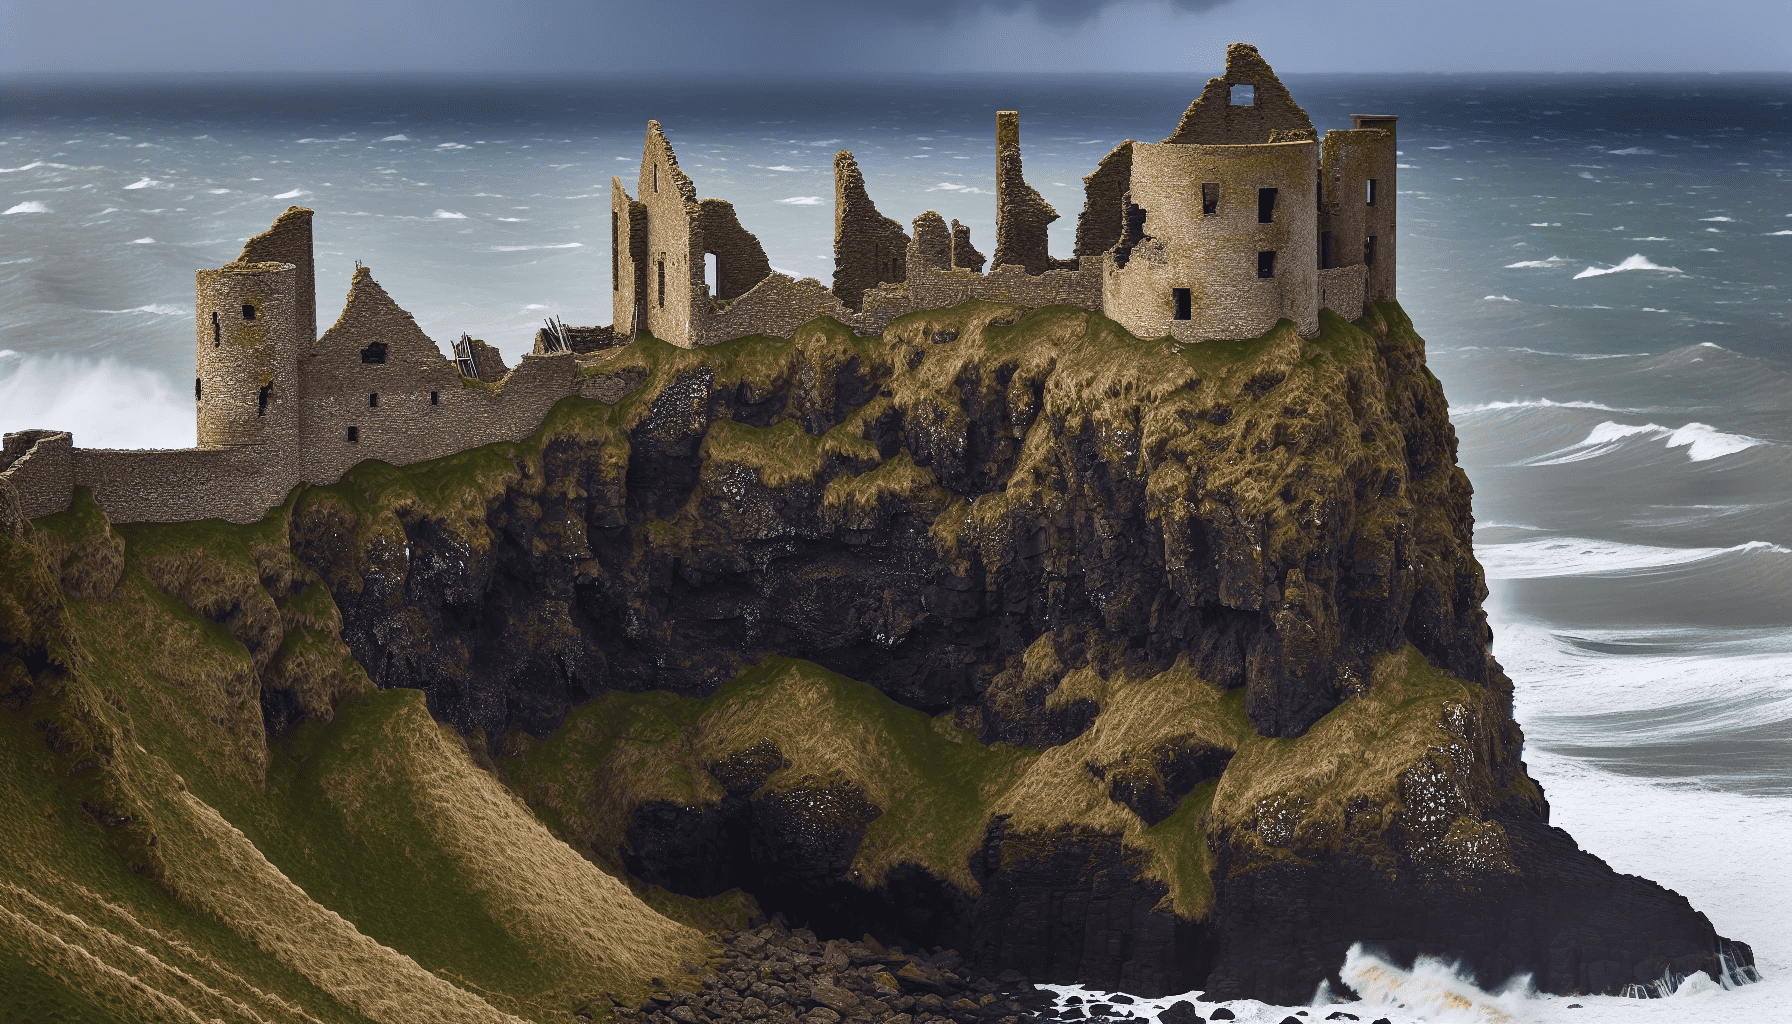 Dunluce Castle perched on a cliff overlooking the sea in Northern Ireland